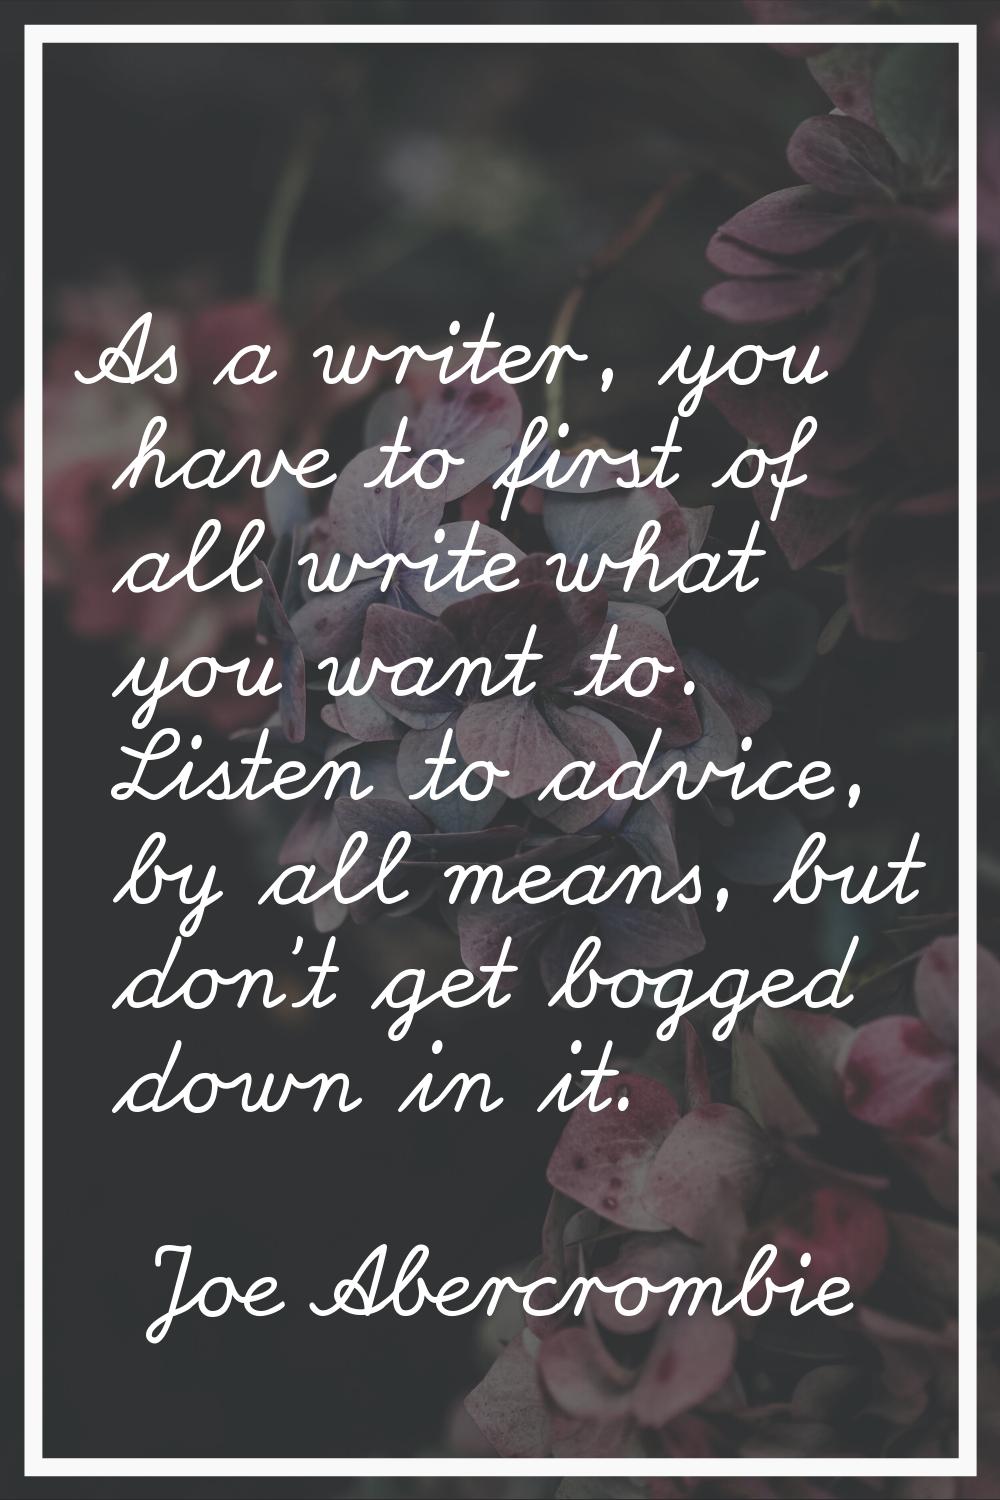 As a writer, you have to first of all write what you want to. Listen to advice, by all means, but d